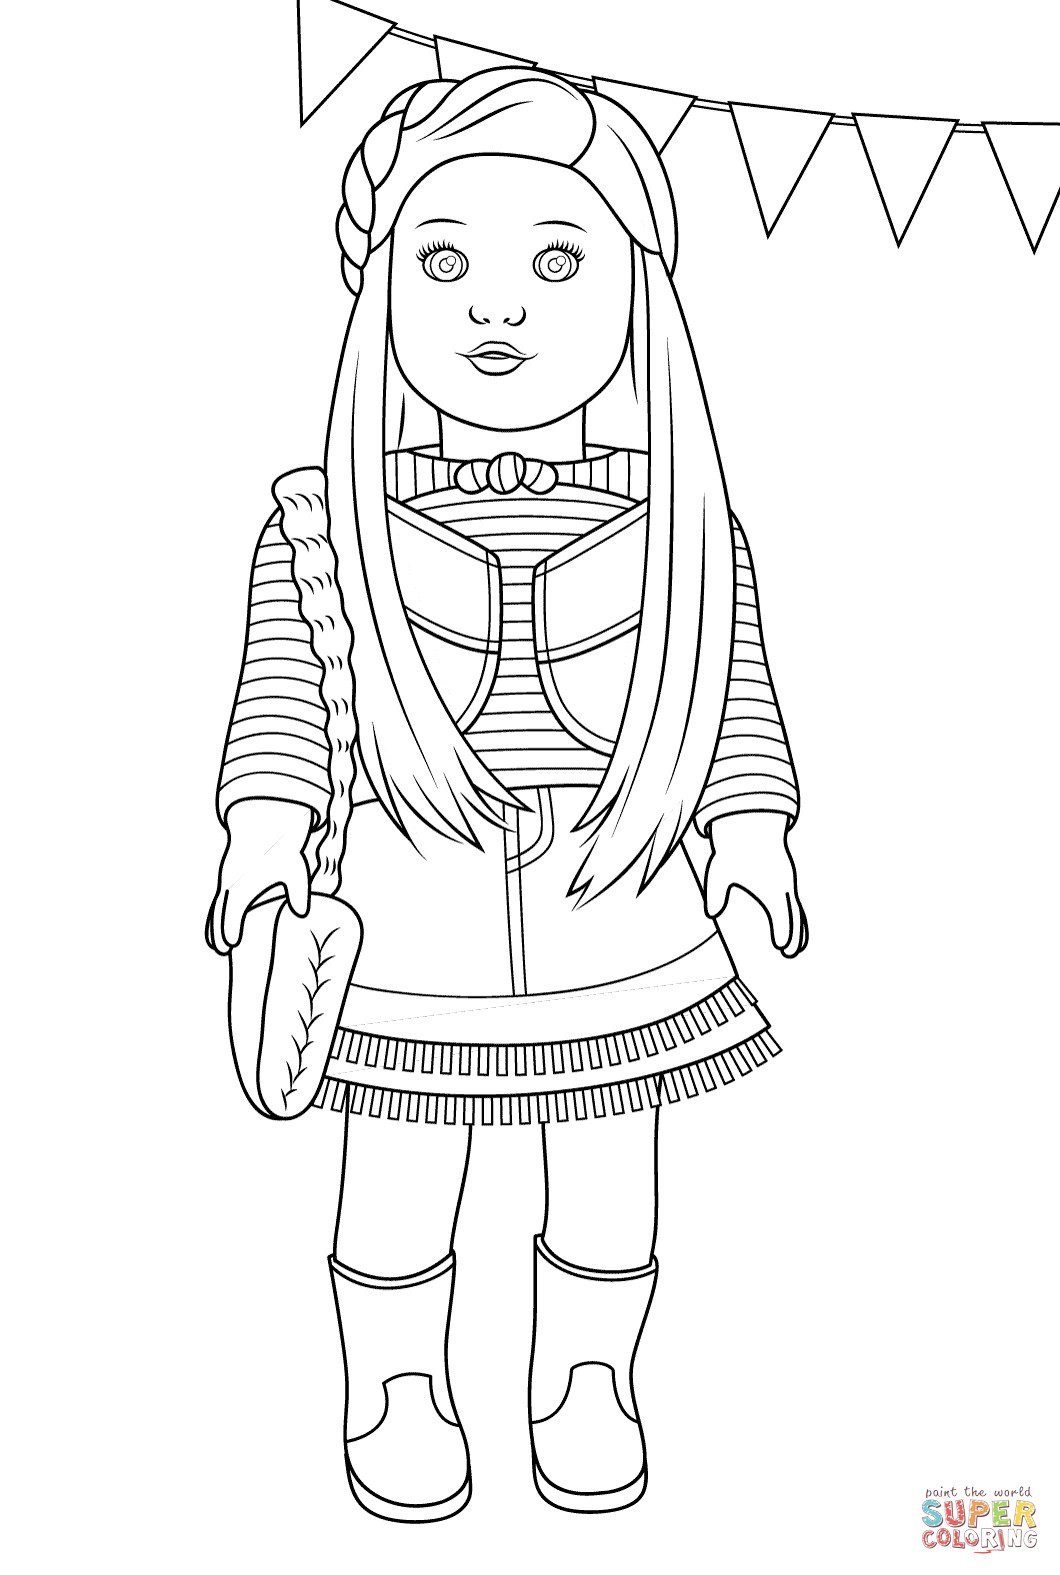 American Girl Coloring Sheet
 American Girl Mckenna coloring page